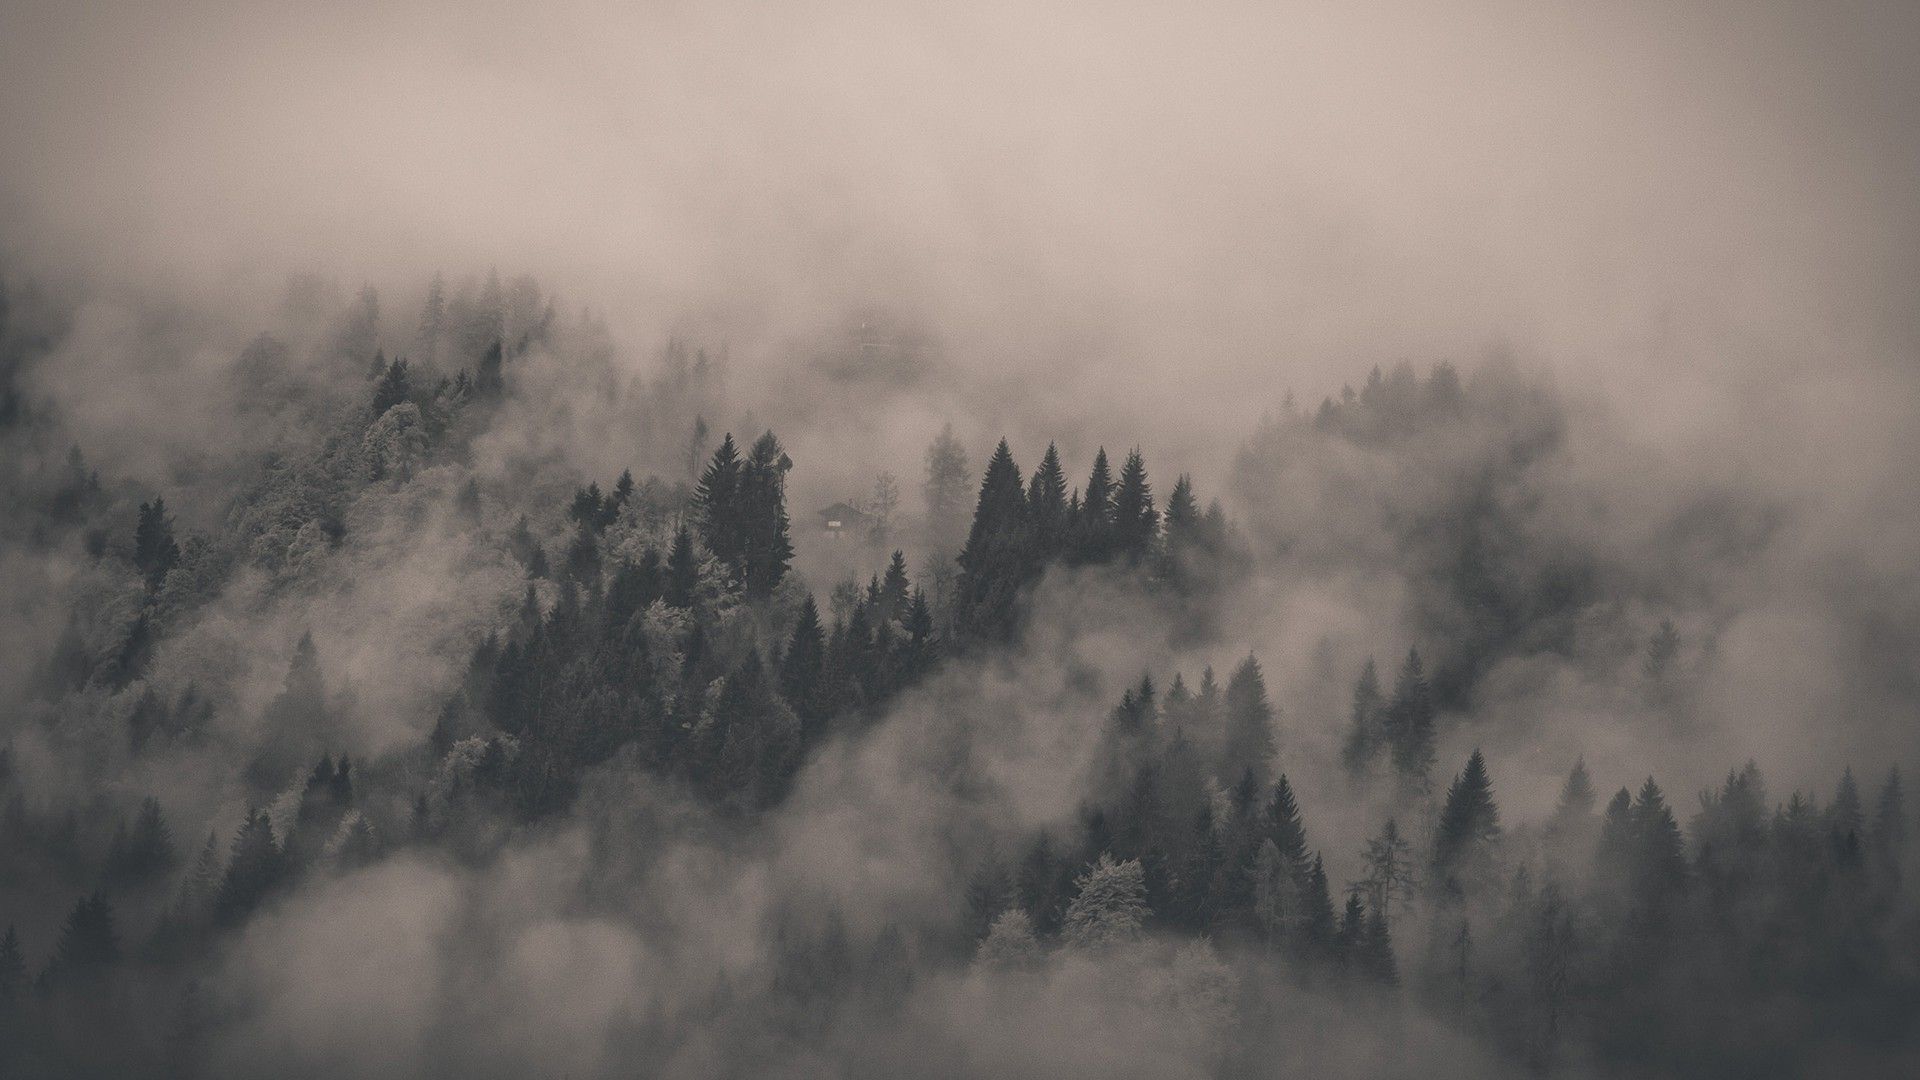 A plane flying over the top of some trees - Foggy forest